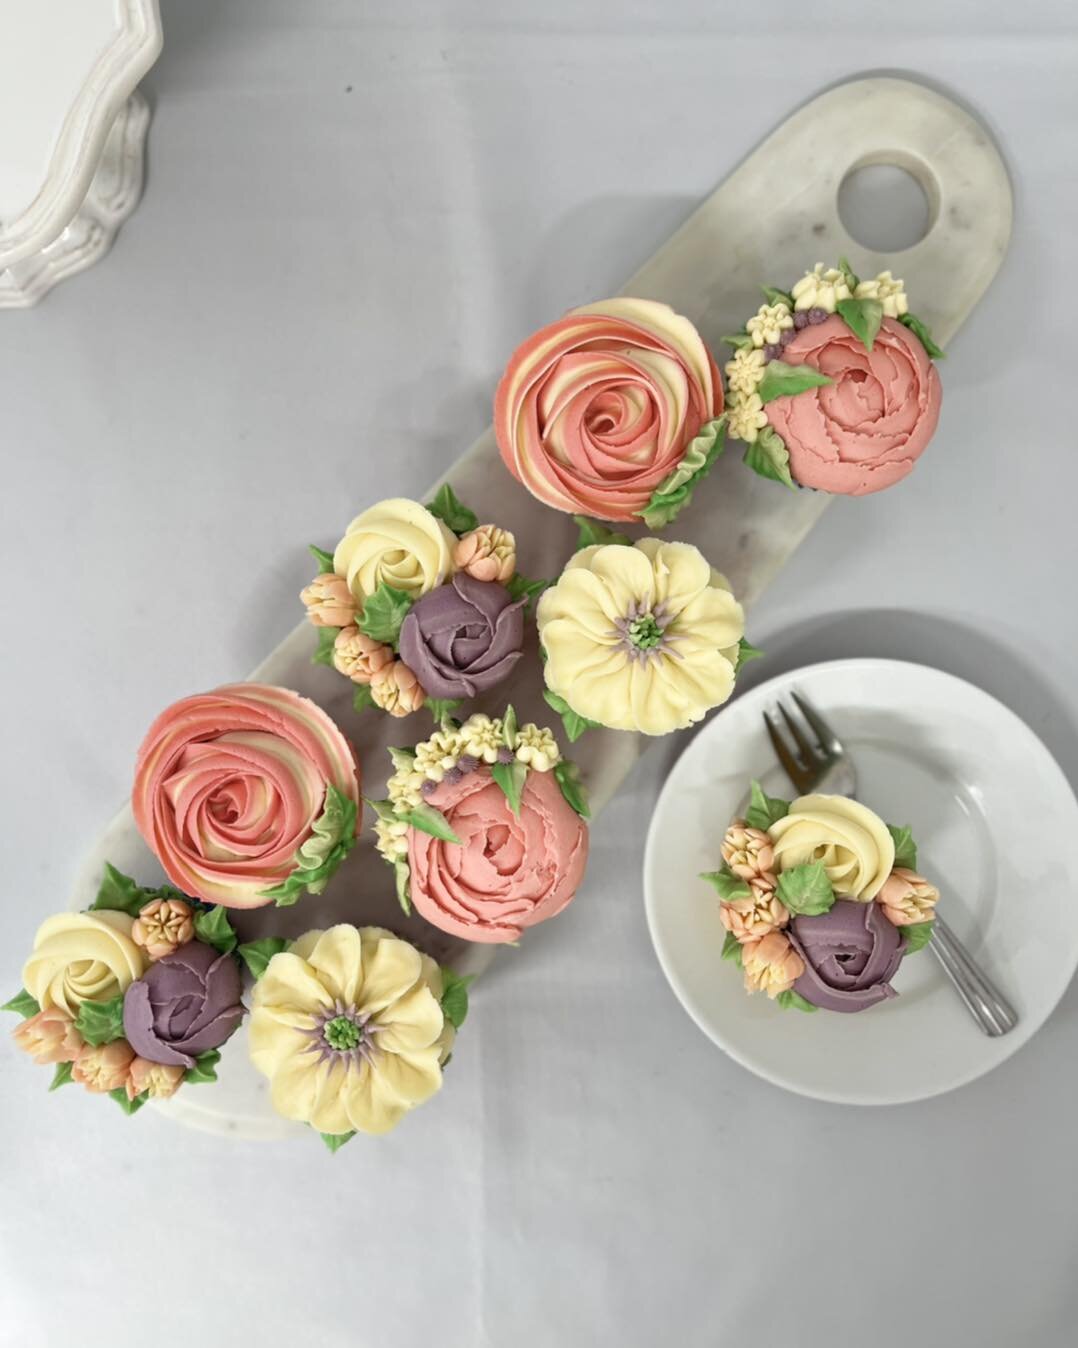 Thinking of entertaining this weekend?
Now taking orders https://www.tarasbakedbouquets.ie/small-cupcake-bouquet
#cupcakes #cupcakeflowerbouquets #cupcakeflowerbouquet #floralcupcakebouquet #floralcupcake #cupcakeflower #cupcakeflowers #tarasbakedbou